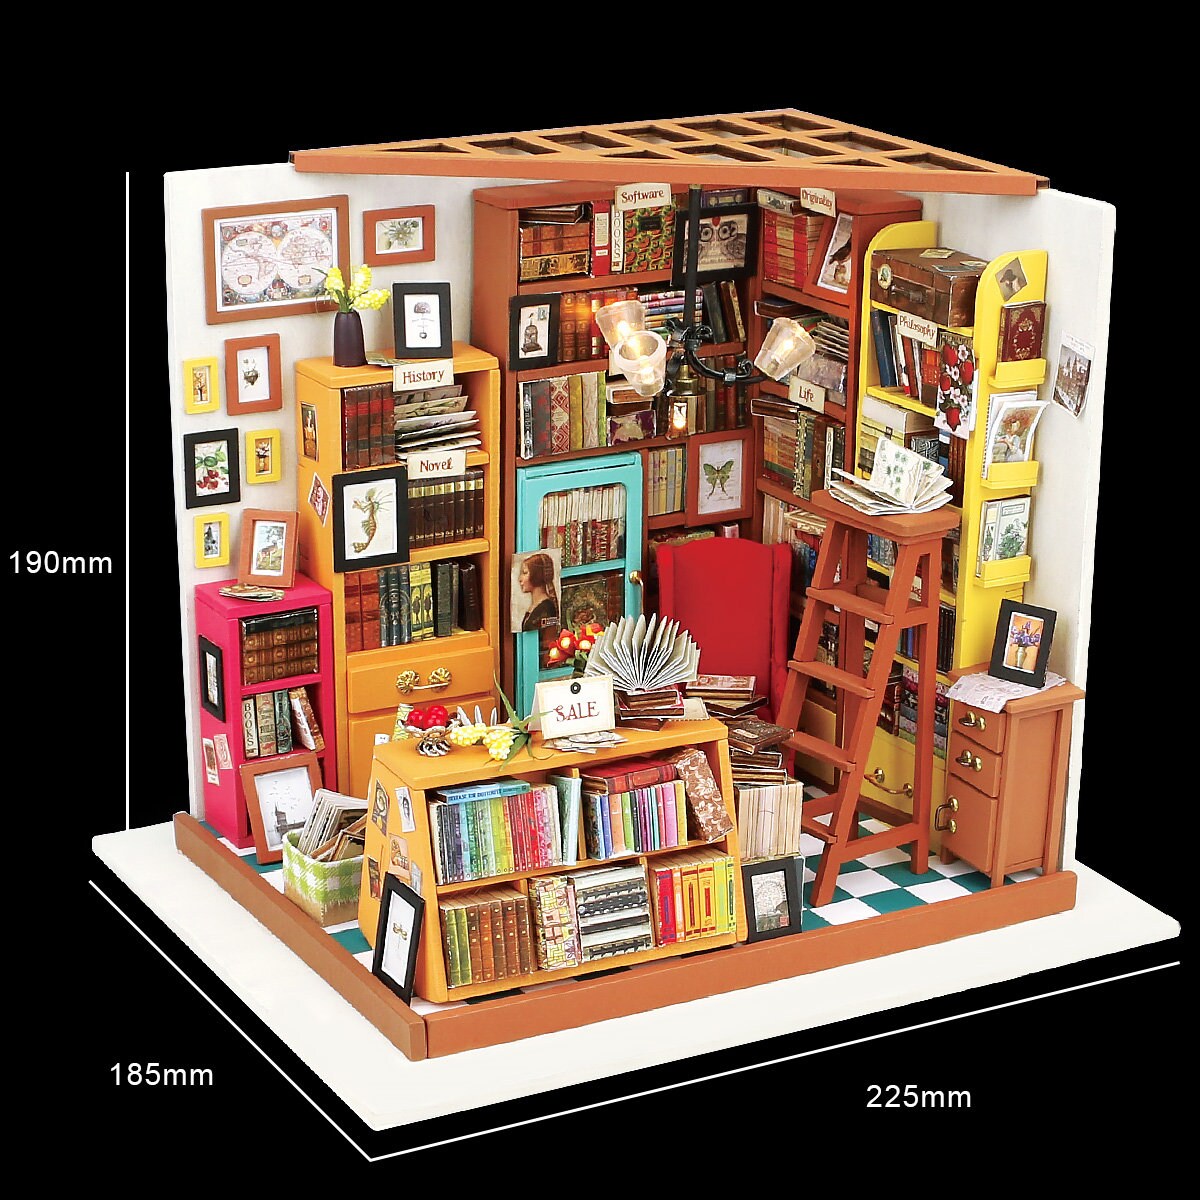 Build Your Own Library, Doll House DIY Kit, Model Set, Miniature Library Craft Kit for Adults, Mini Diorama Room with Furniture